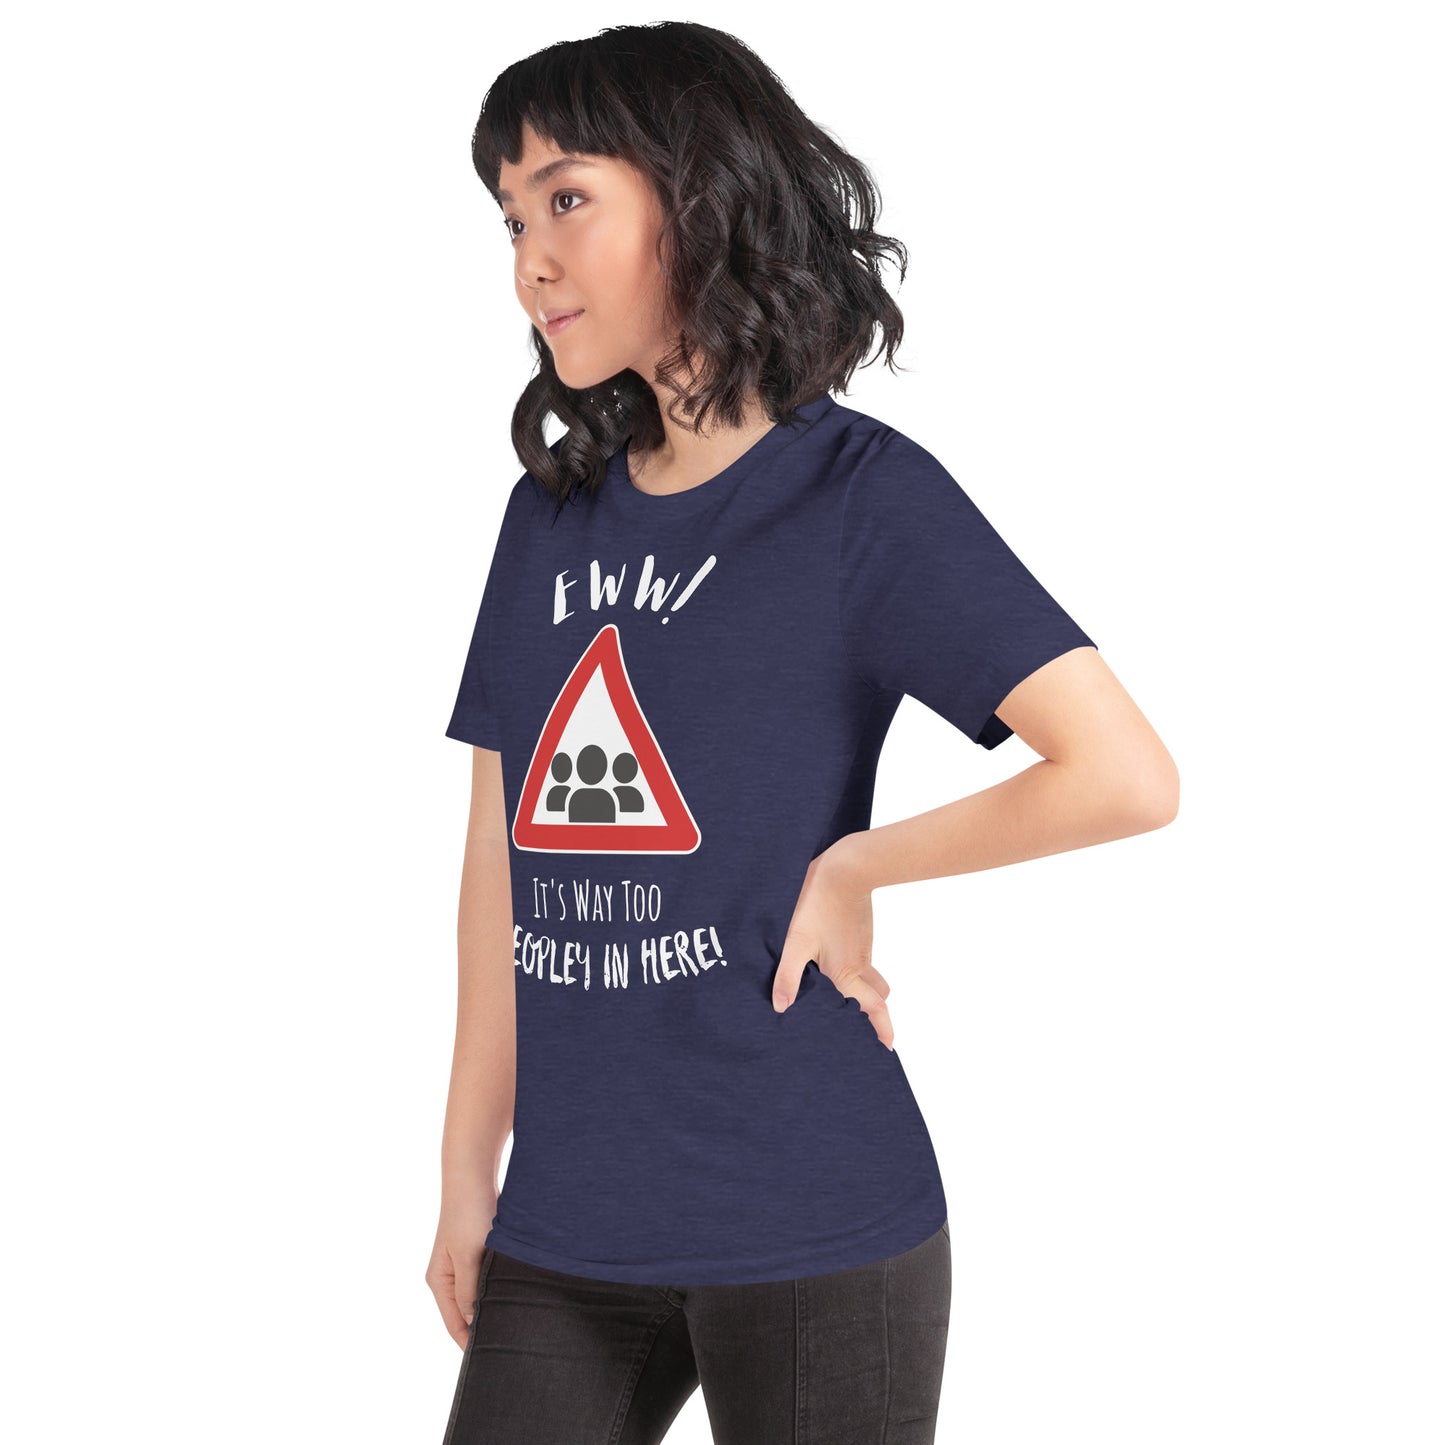 Eww, it's way too peopley in here. : Unisex t-shirt